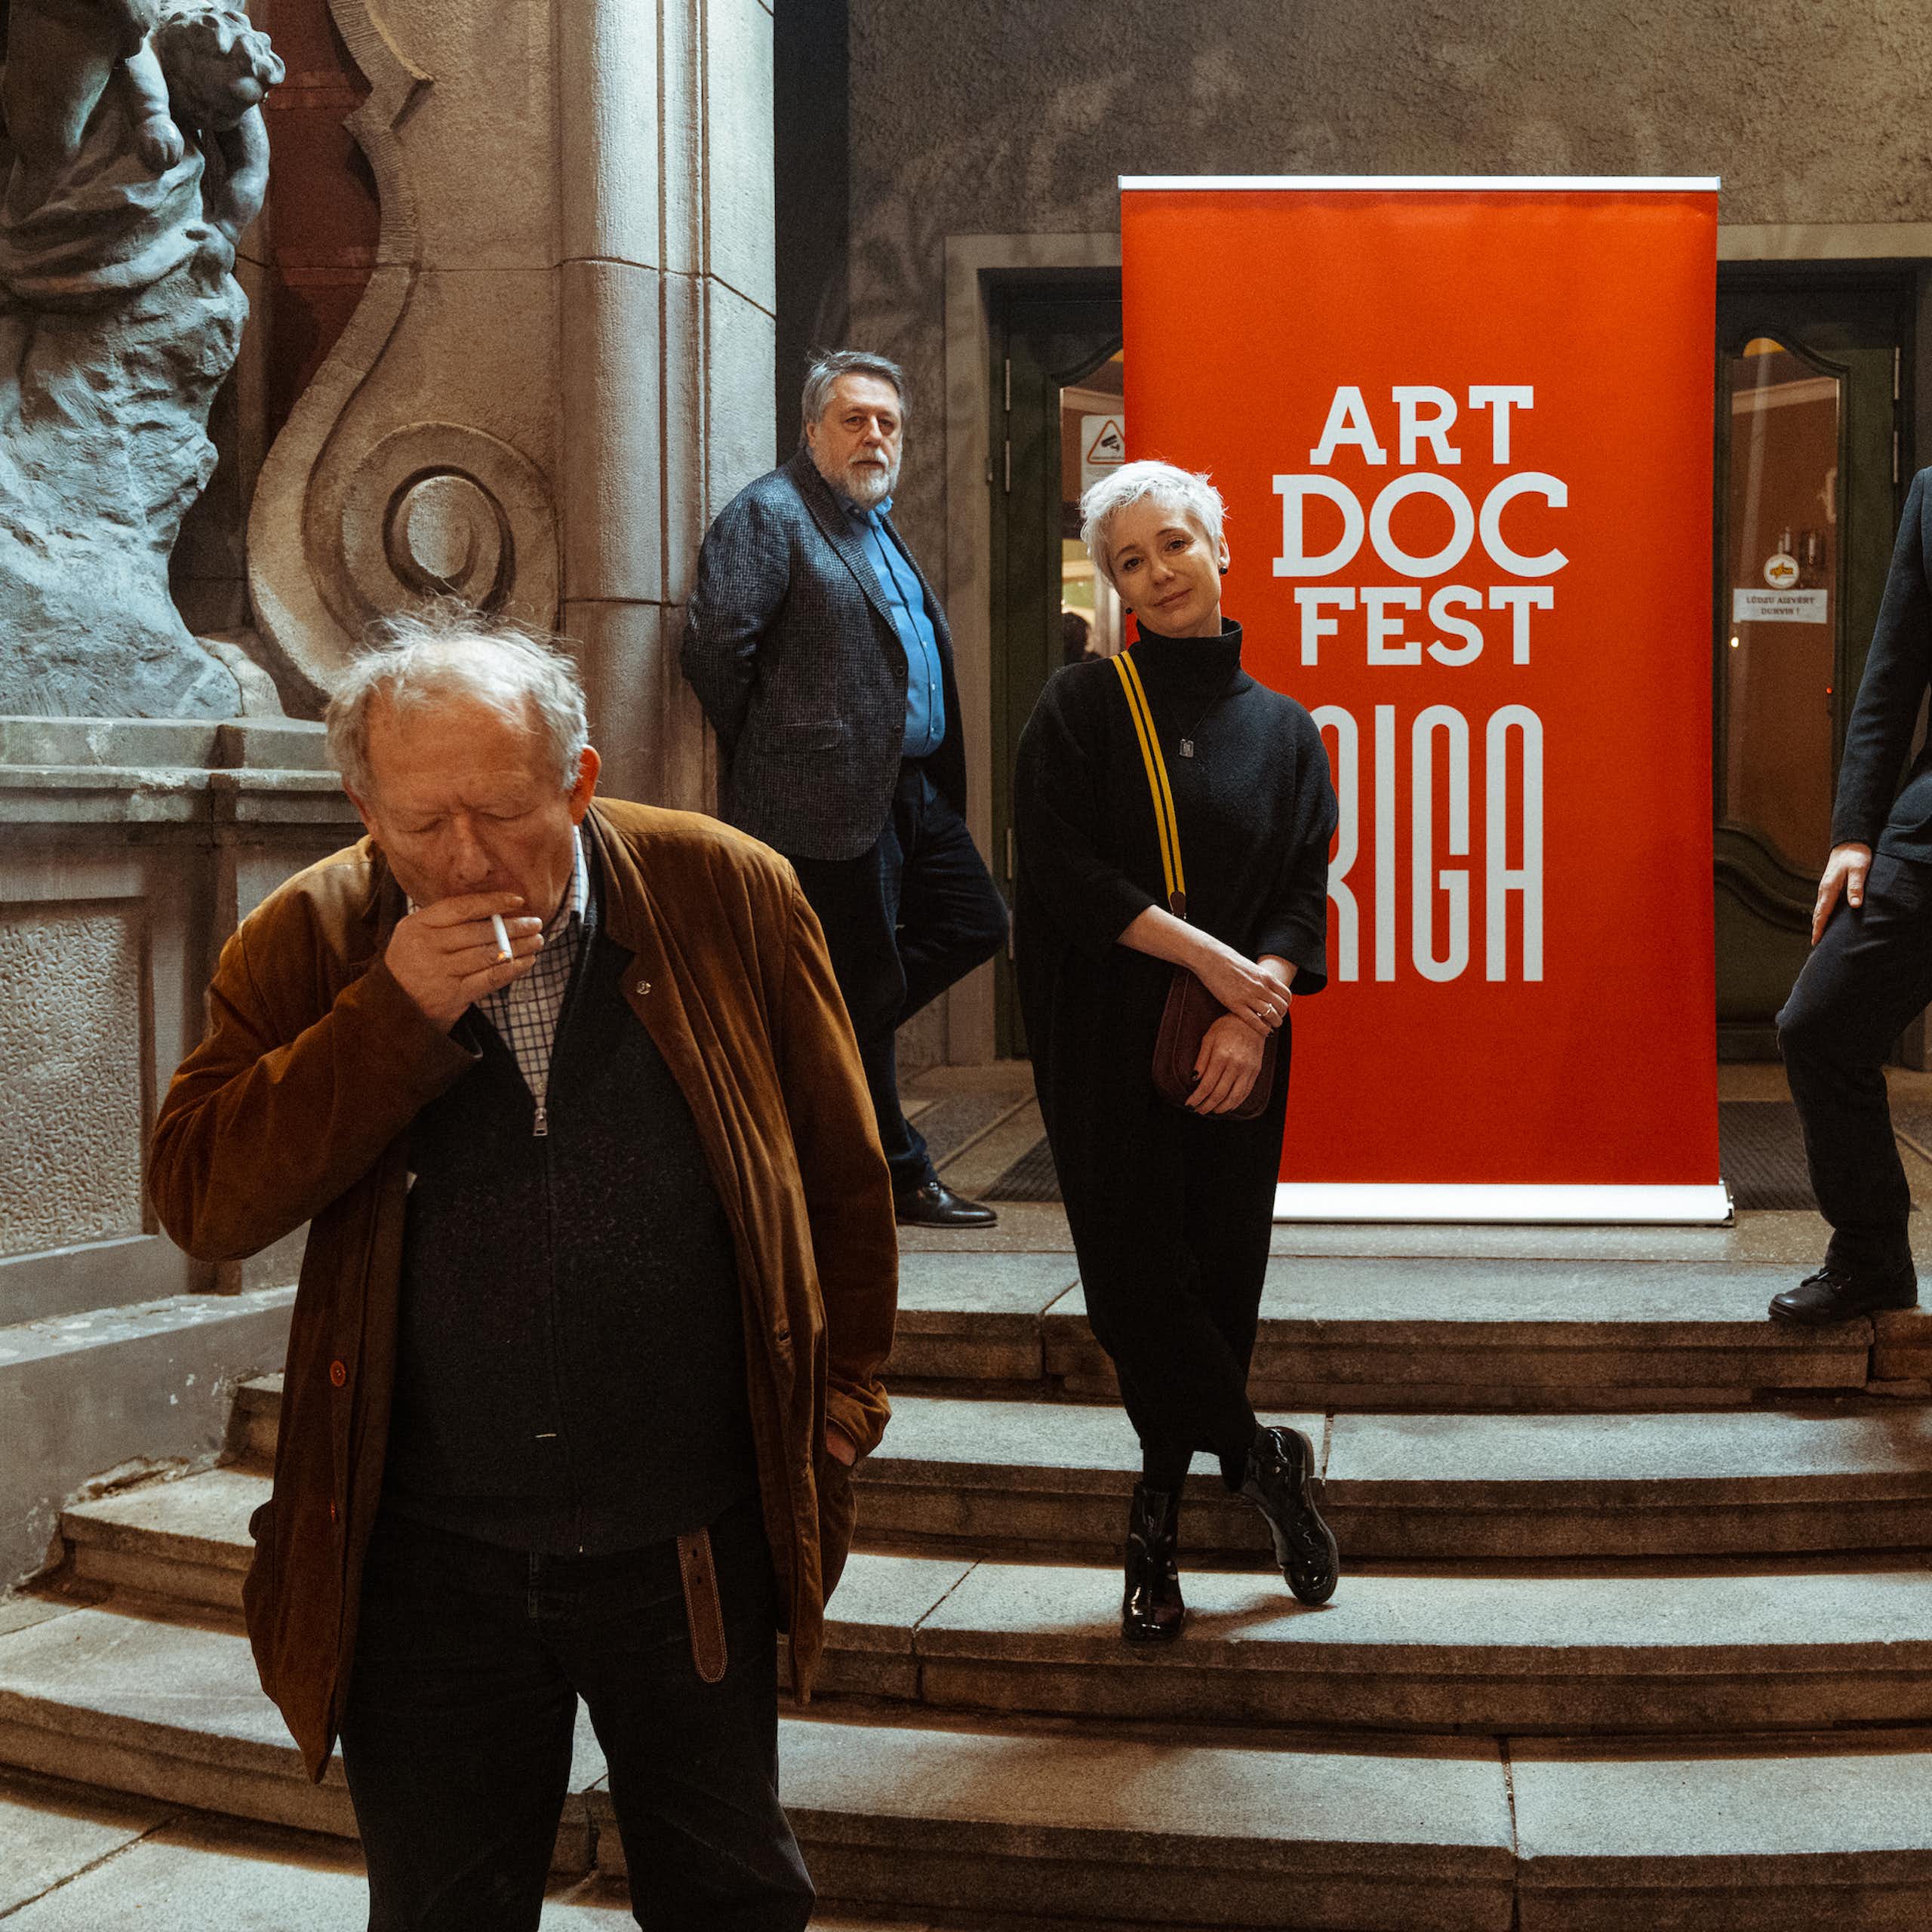 Four people stand in front of a sign for Art Doc Fest Riga